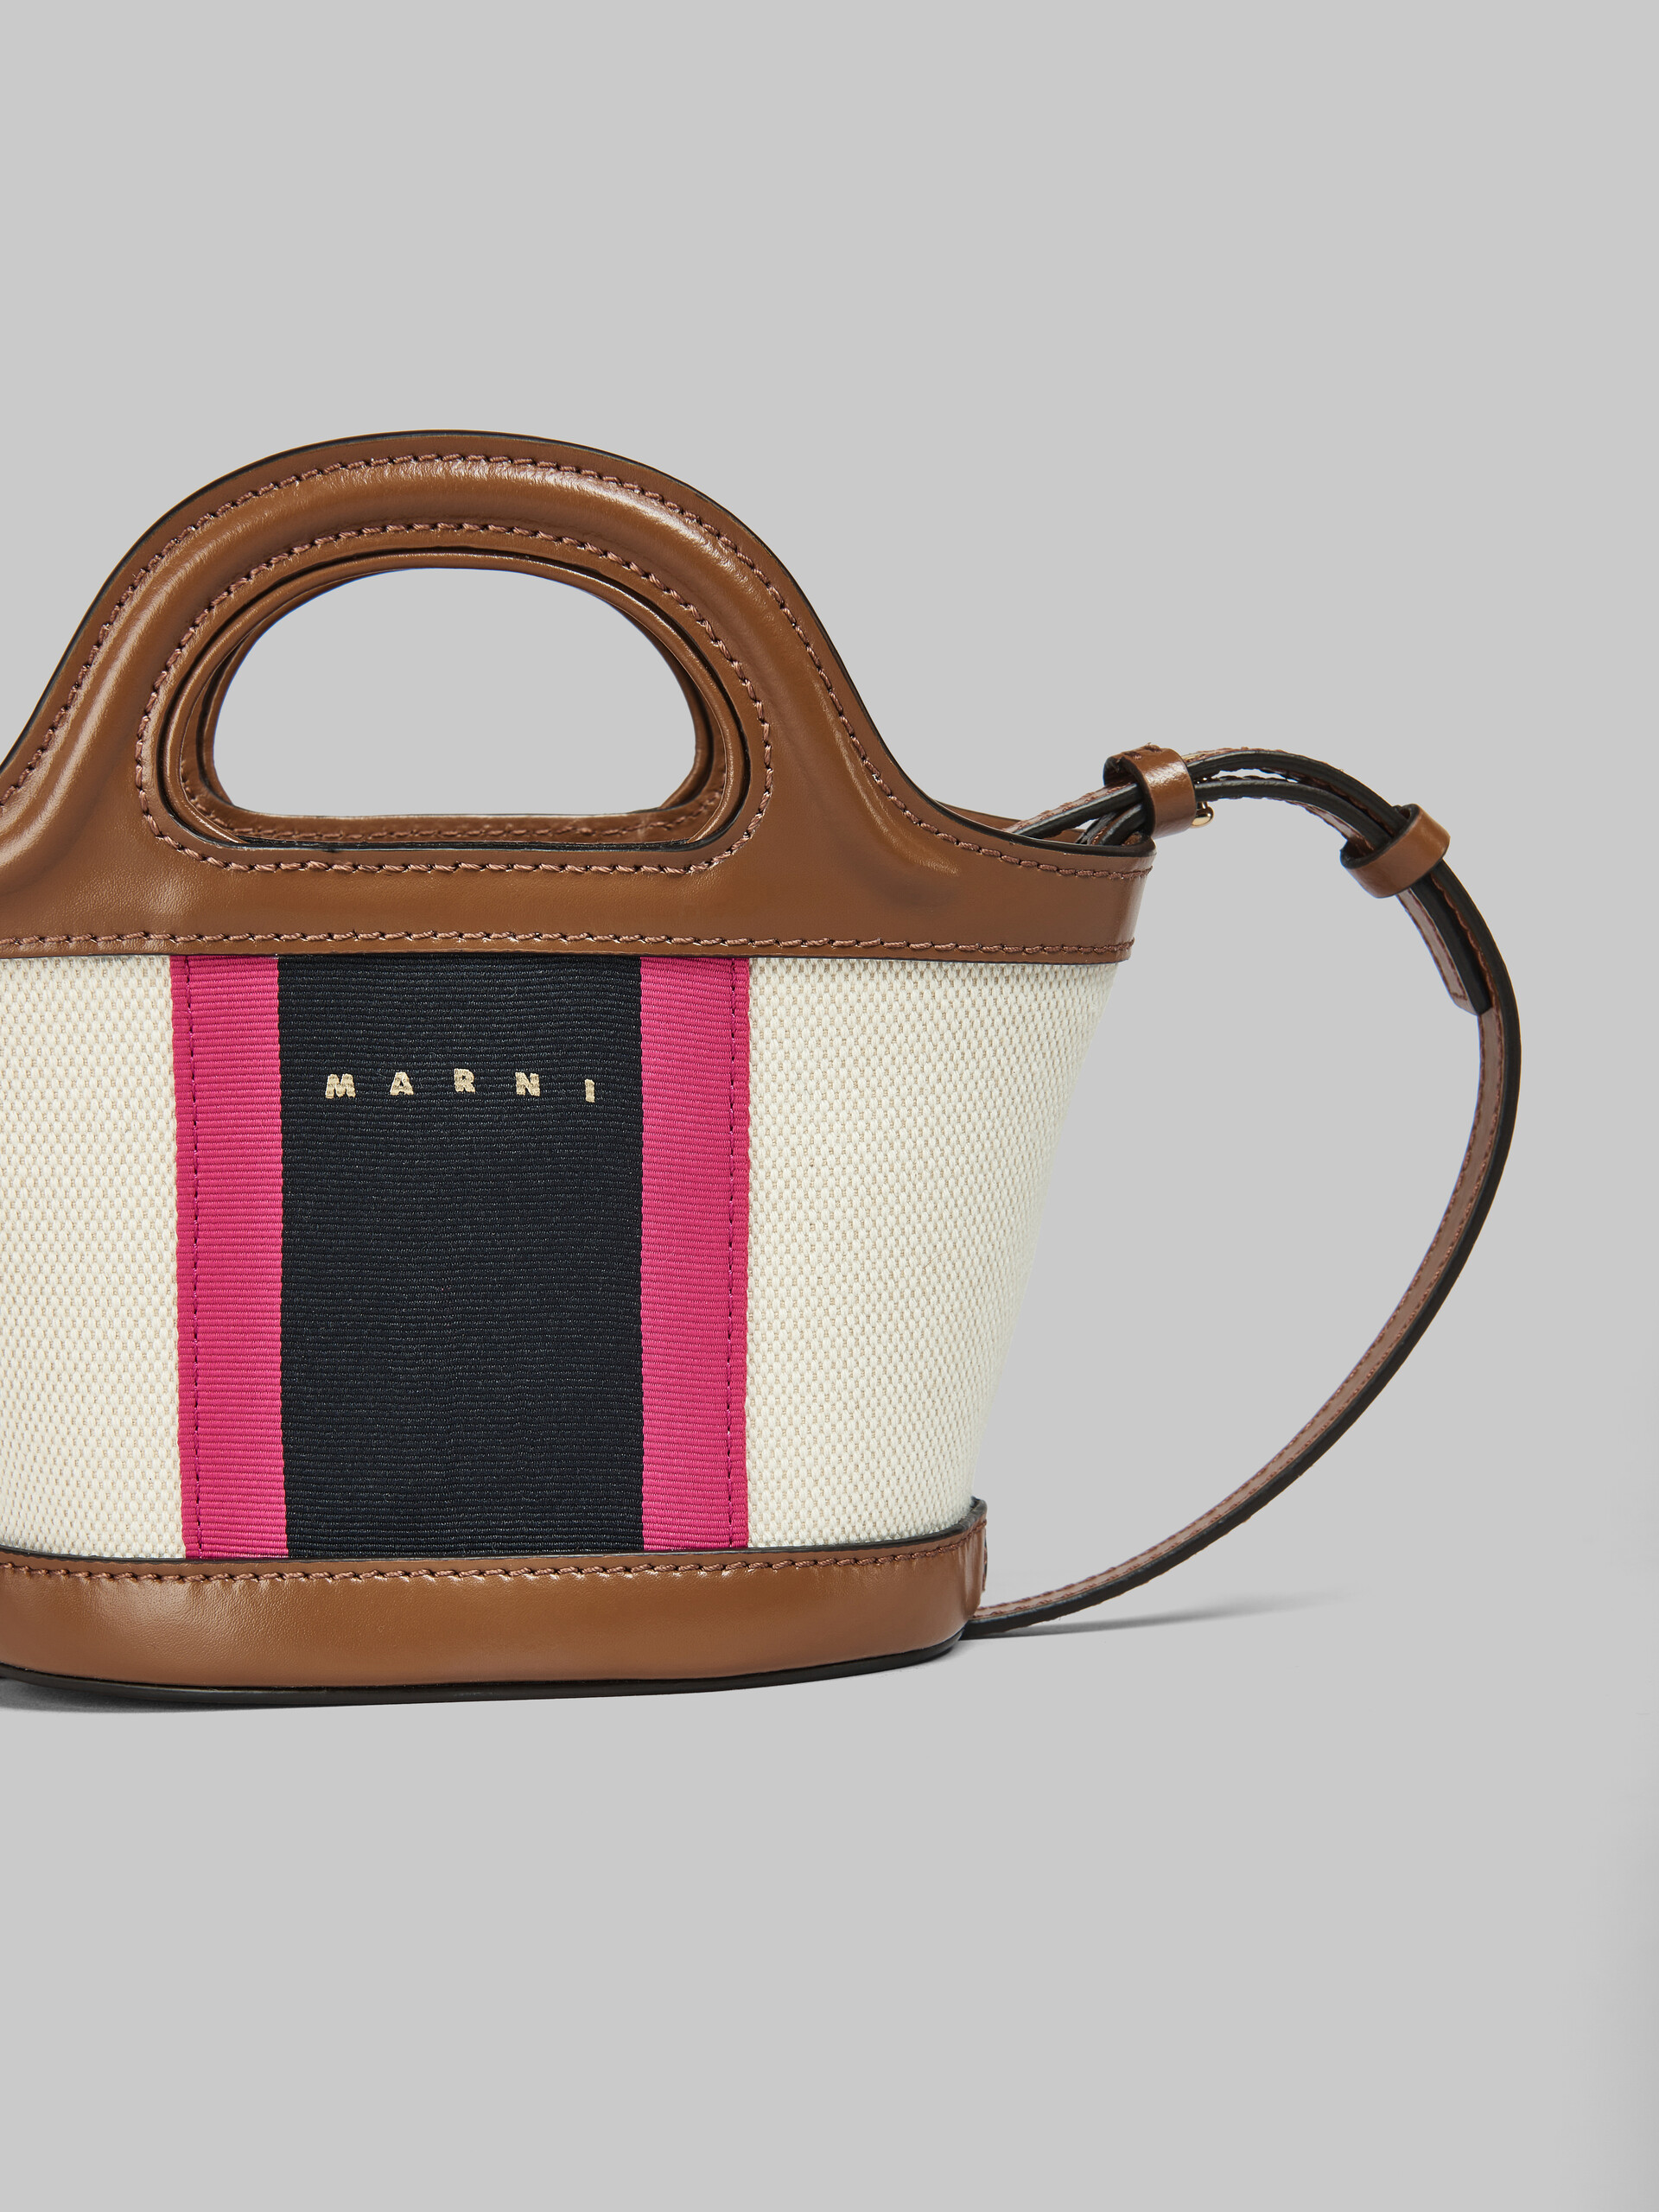 Tropicalia Micro Bag in Brown leather and striped canvas - Handbags - Image 5